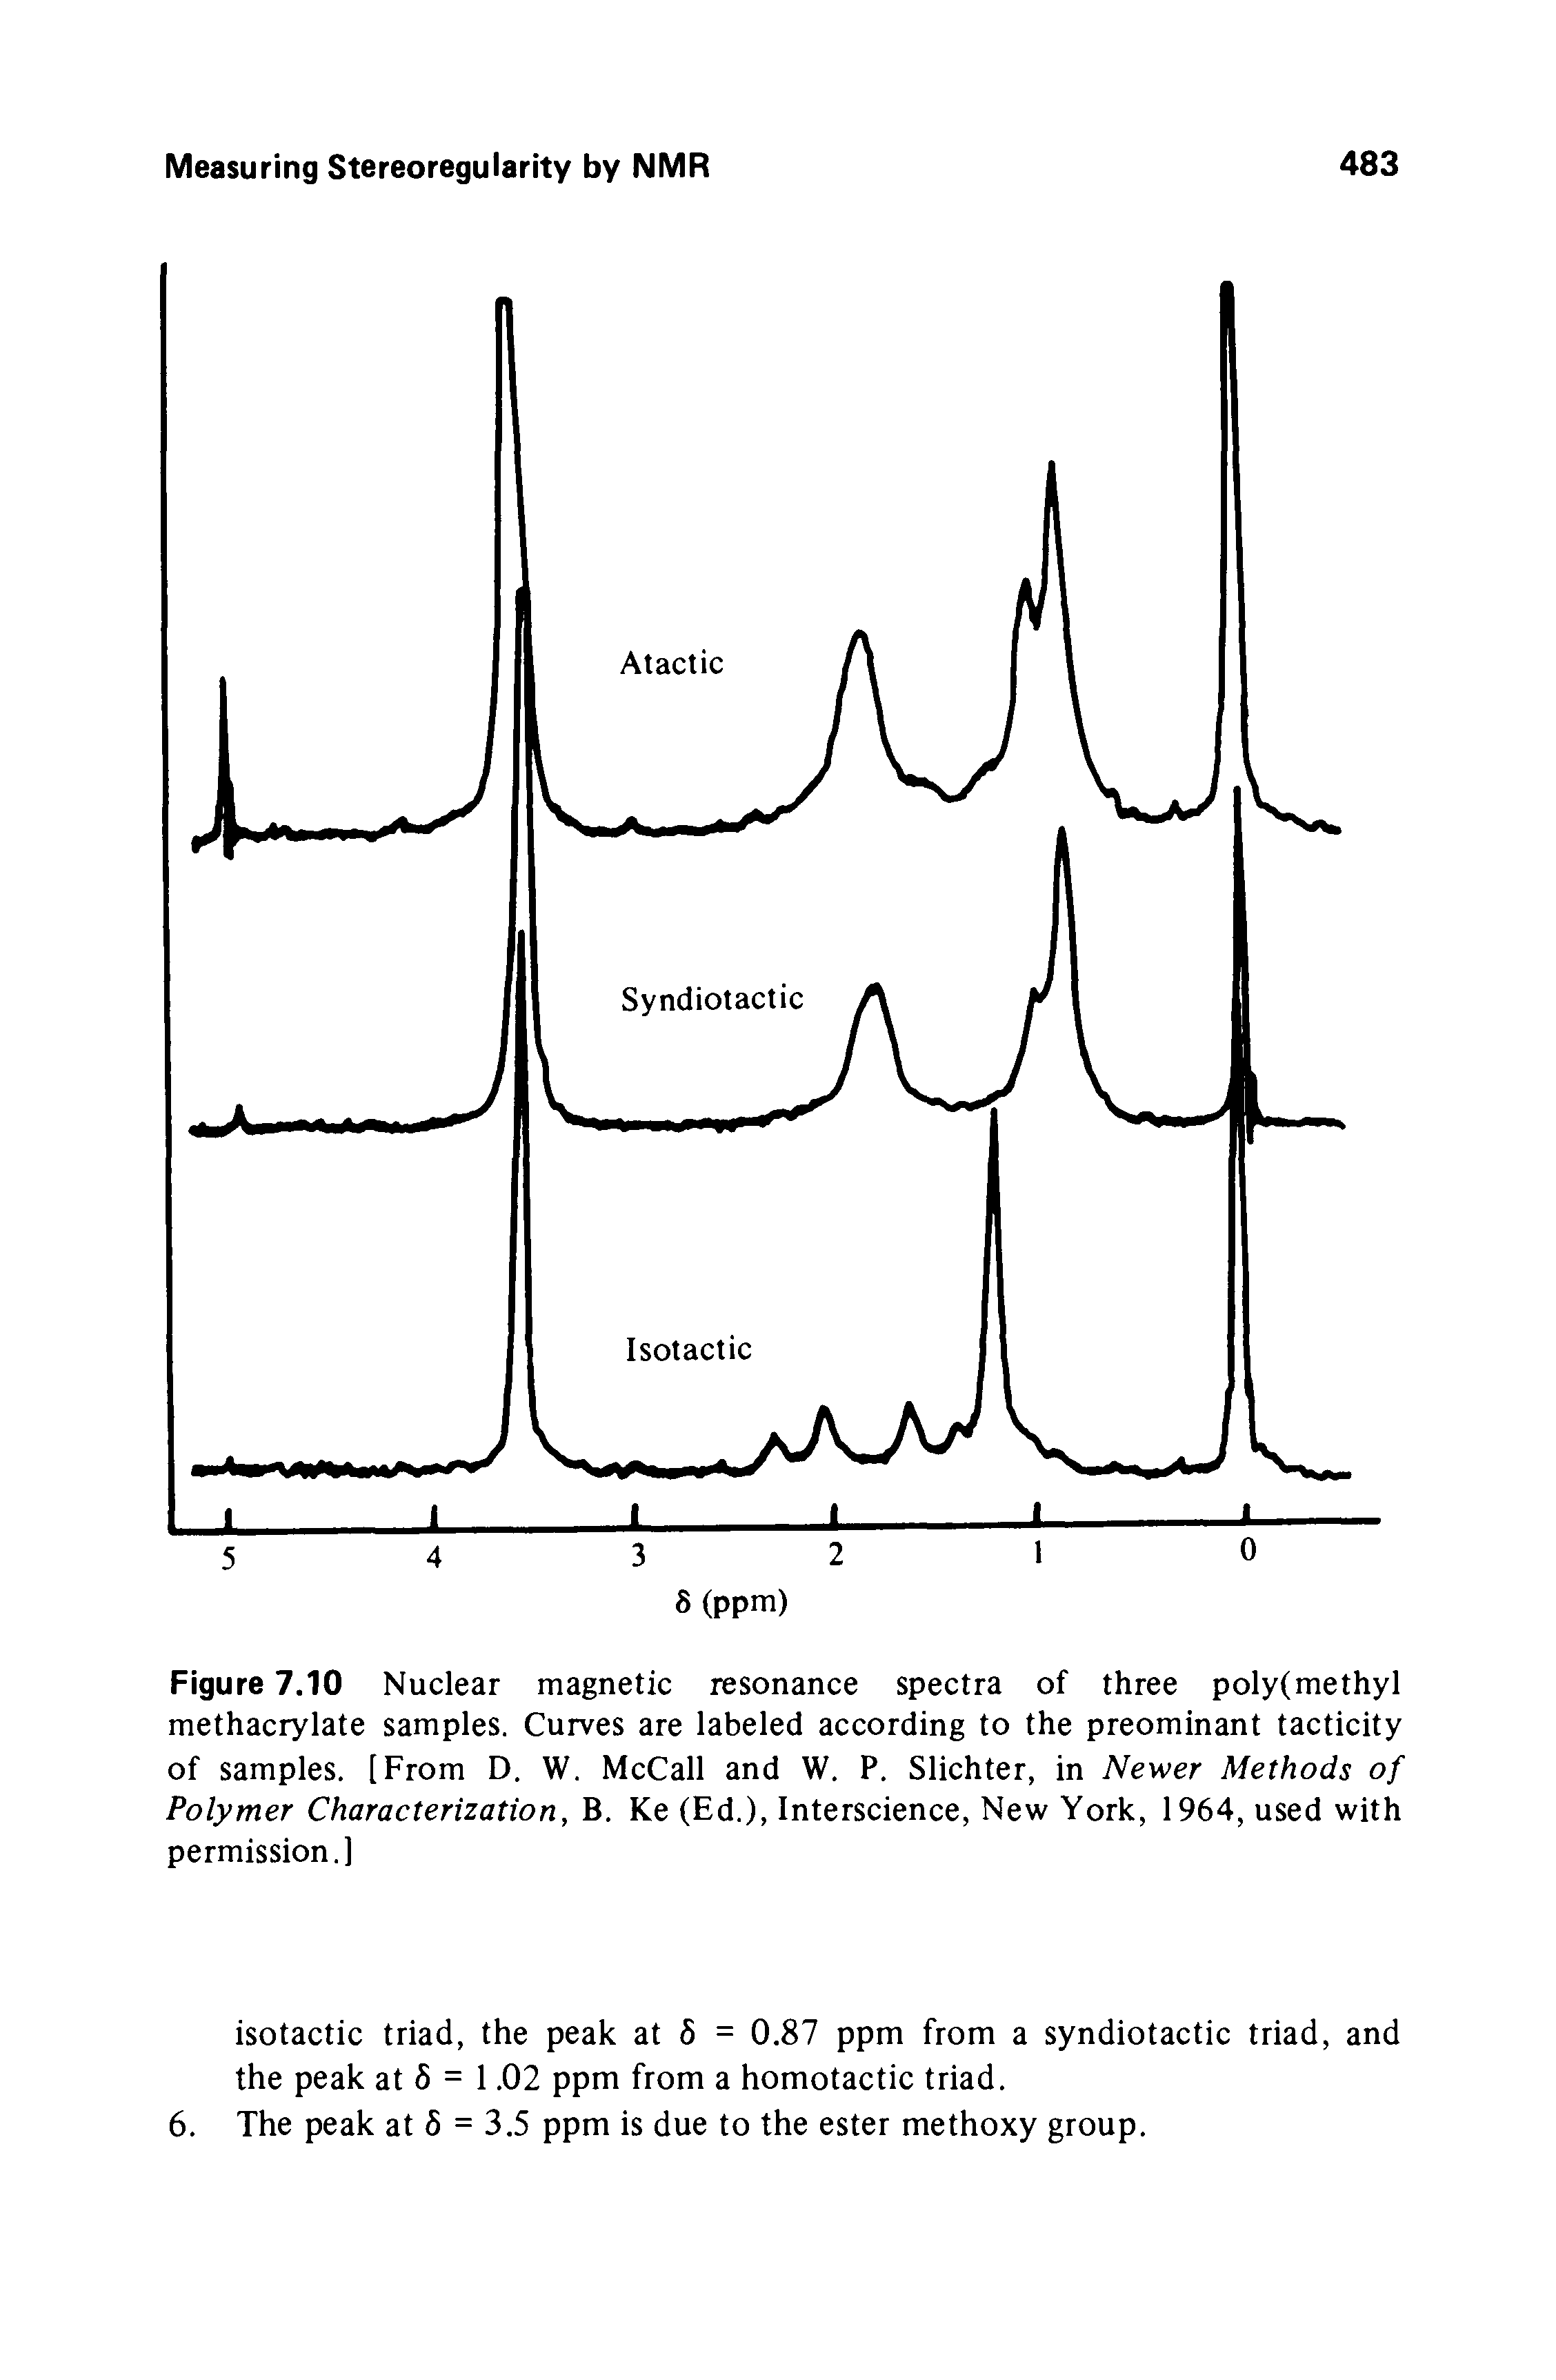 Figure 7.10 Nuclear magnetic resonance spectra of three poly(methyl methacrylate samples. Curves are labeled according to the preominant tacticity of samples. [From D. W. McCall and W. P. Slichter, in Newer Methods of Polymer Characterization, B. Ke (Ed.), Interscience, New York, 1964, used with permission.]...